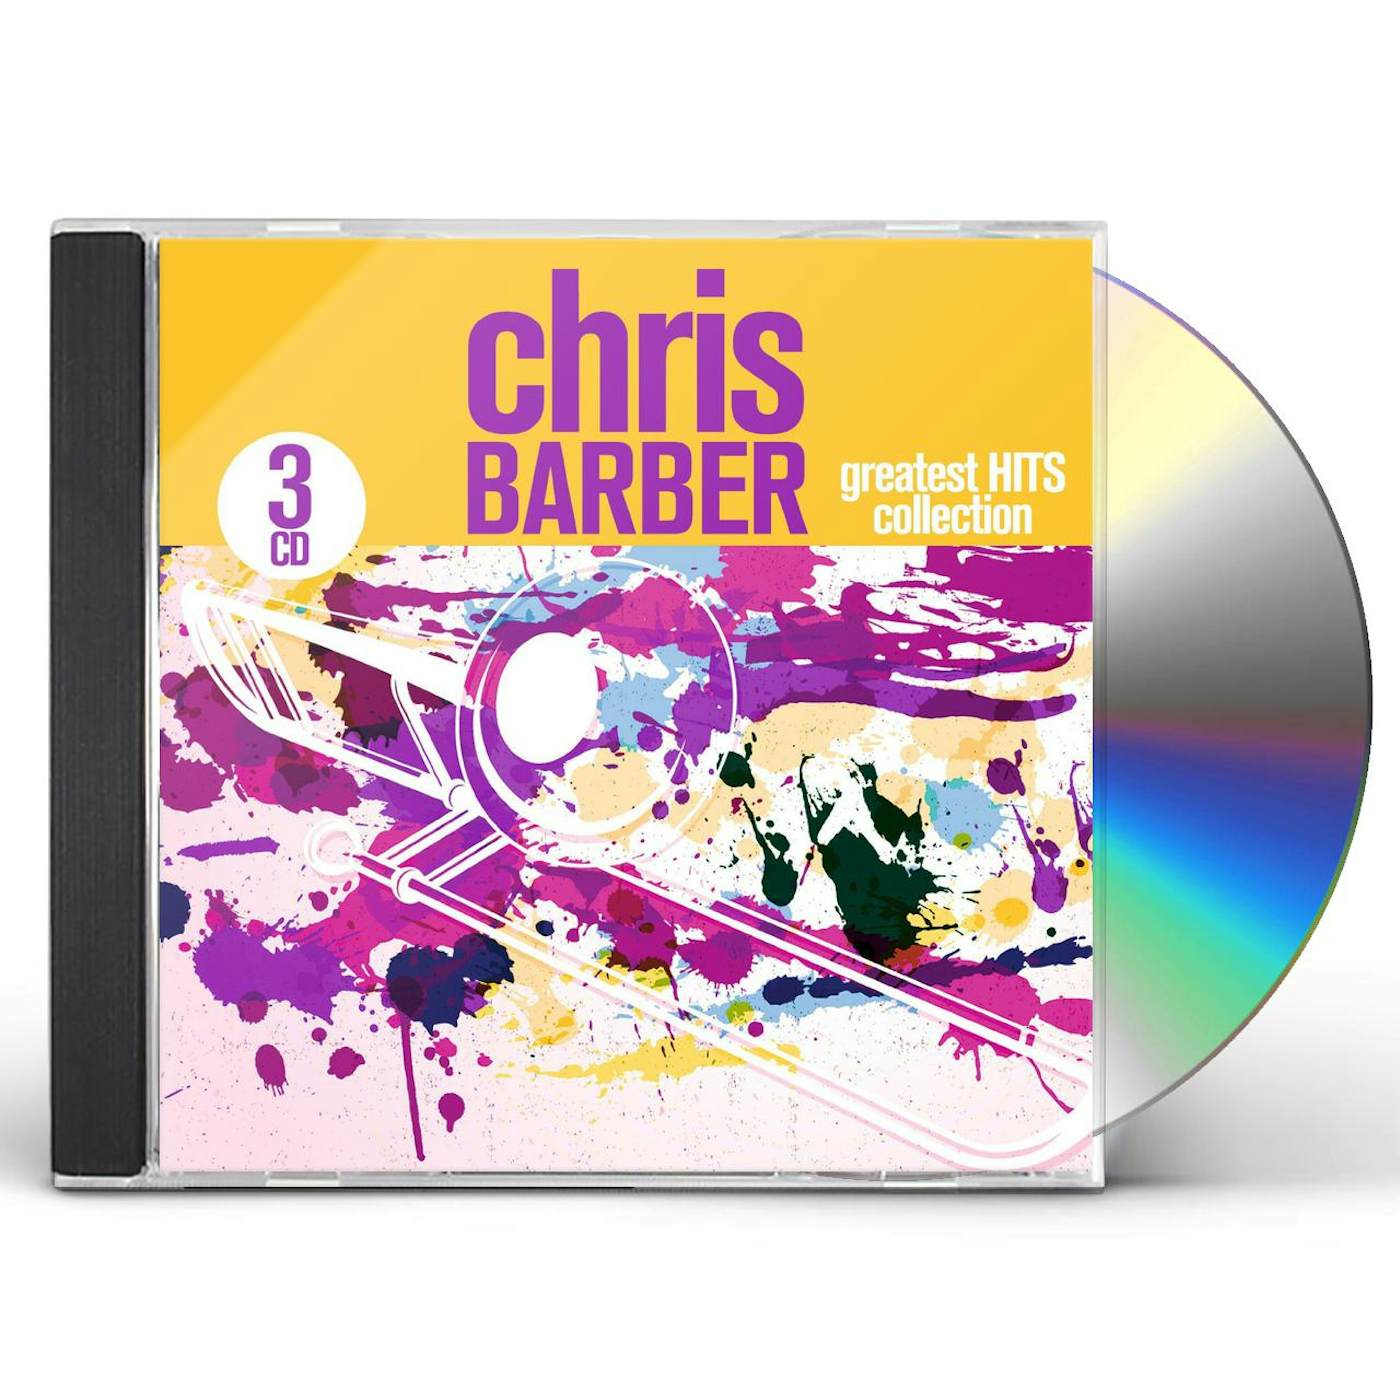 Chris Barber GREATEST HITS COLLECTION CD